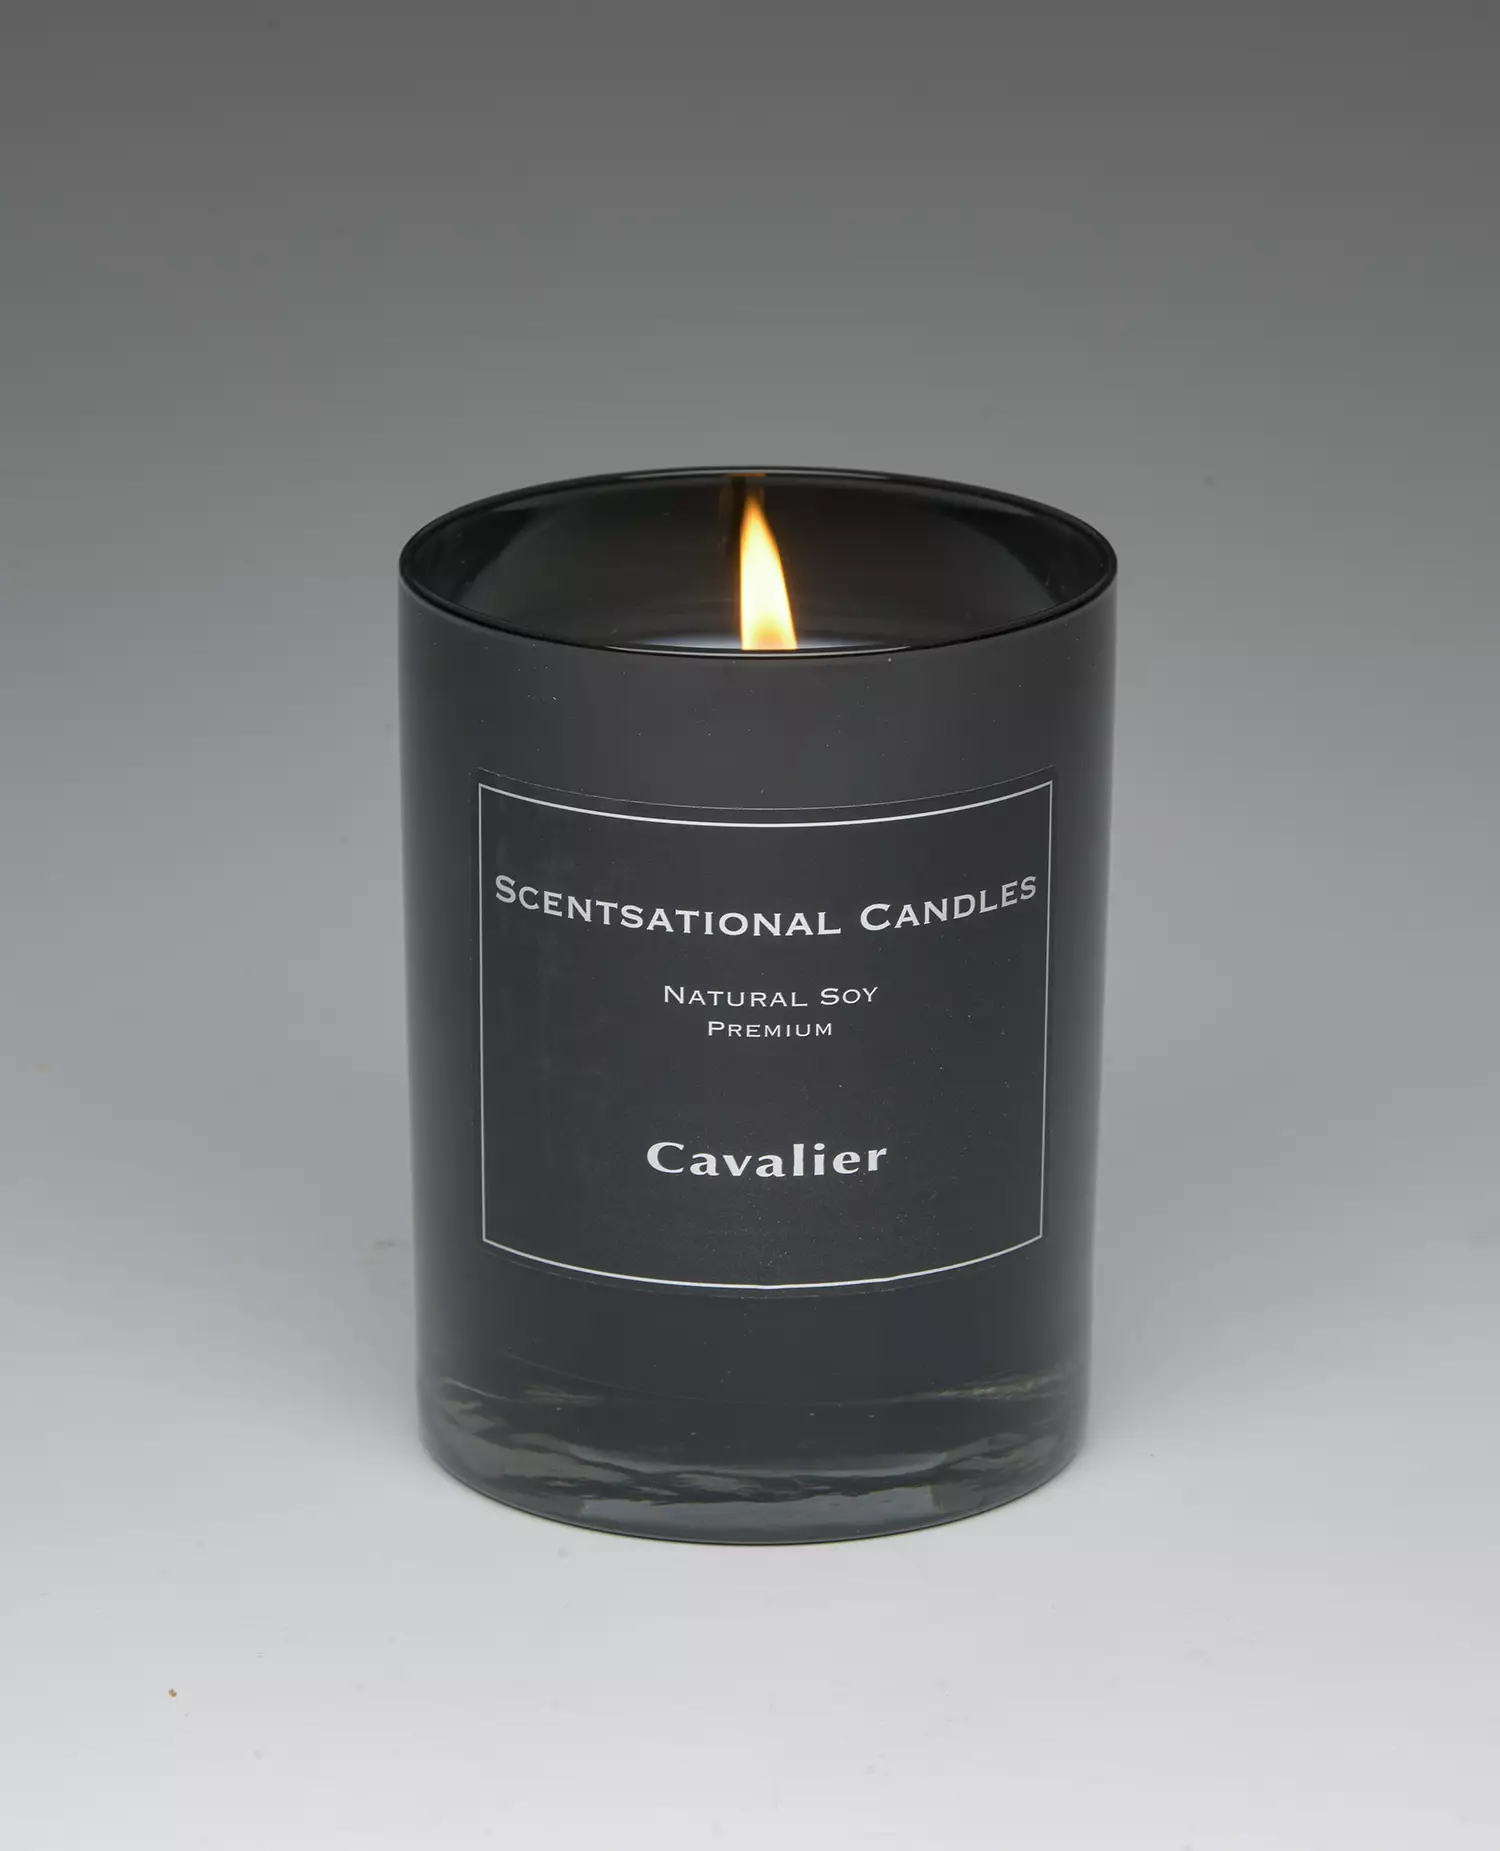 Cavalier – 11oz scented candle burning